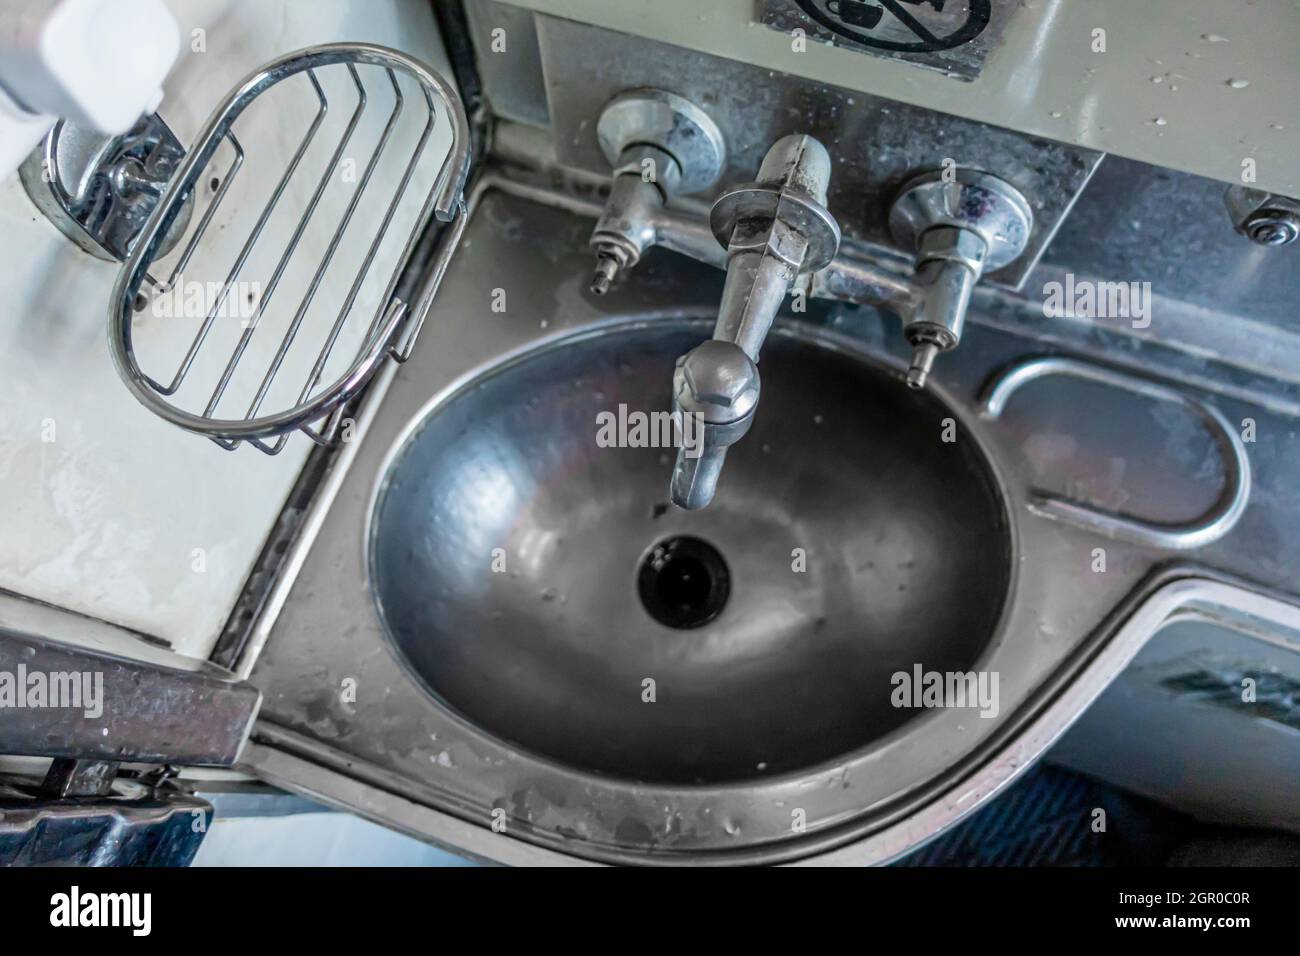 The metal sink in the bathroom of the train Couchette car carriage in the economy class of the 61 family carrying passengers in former USSR countries Stock Photo